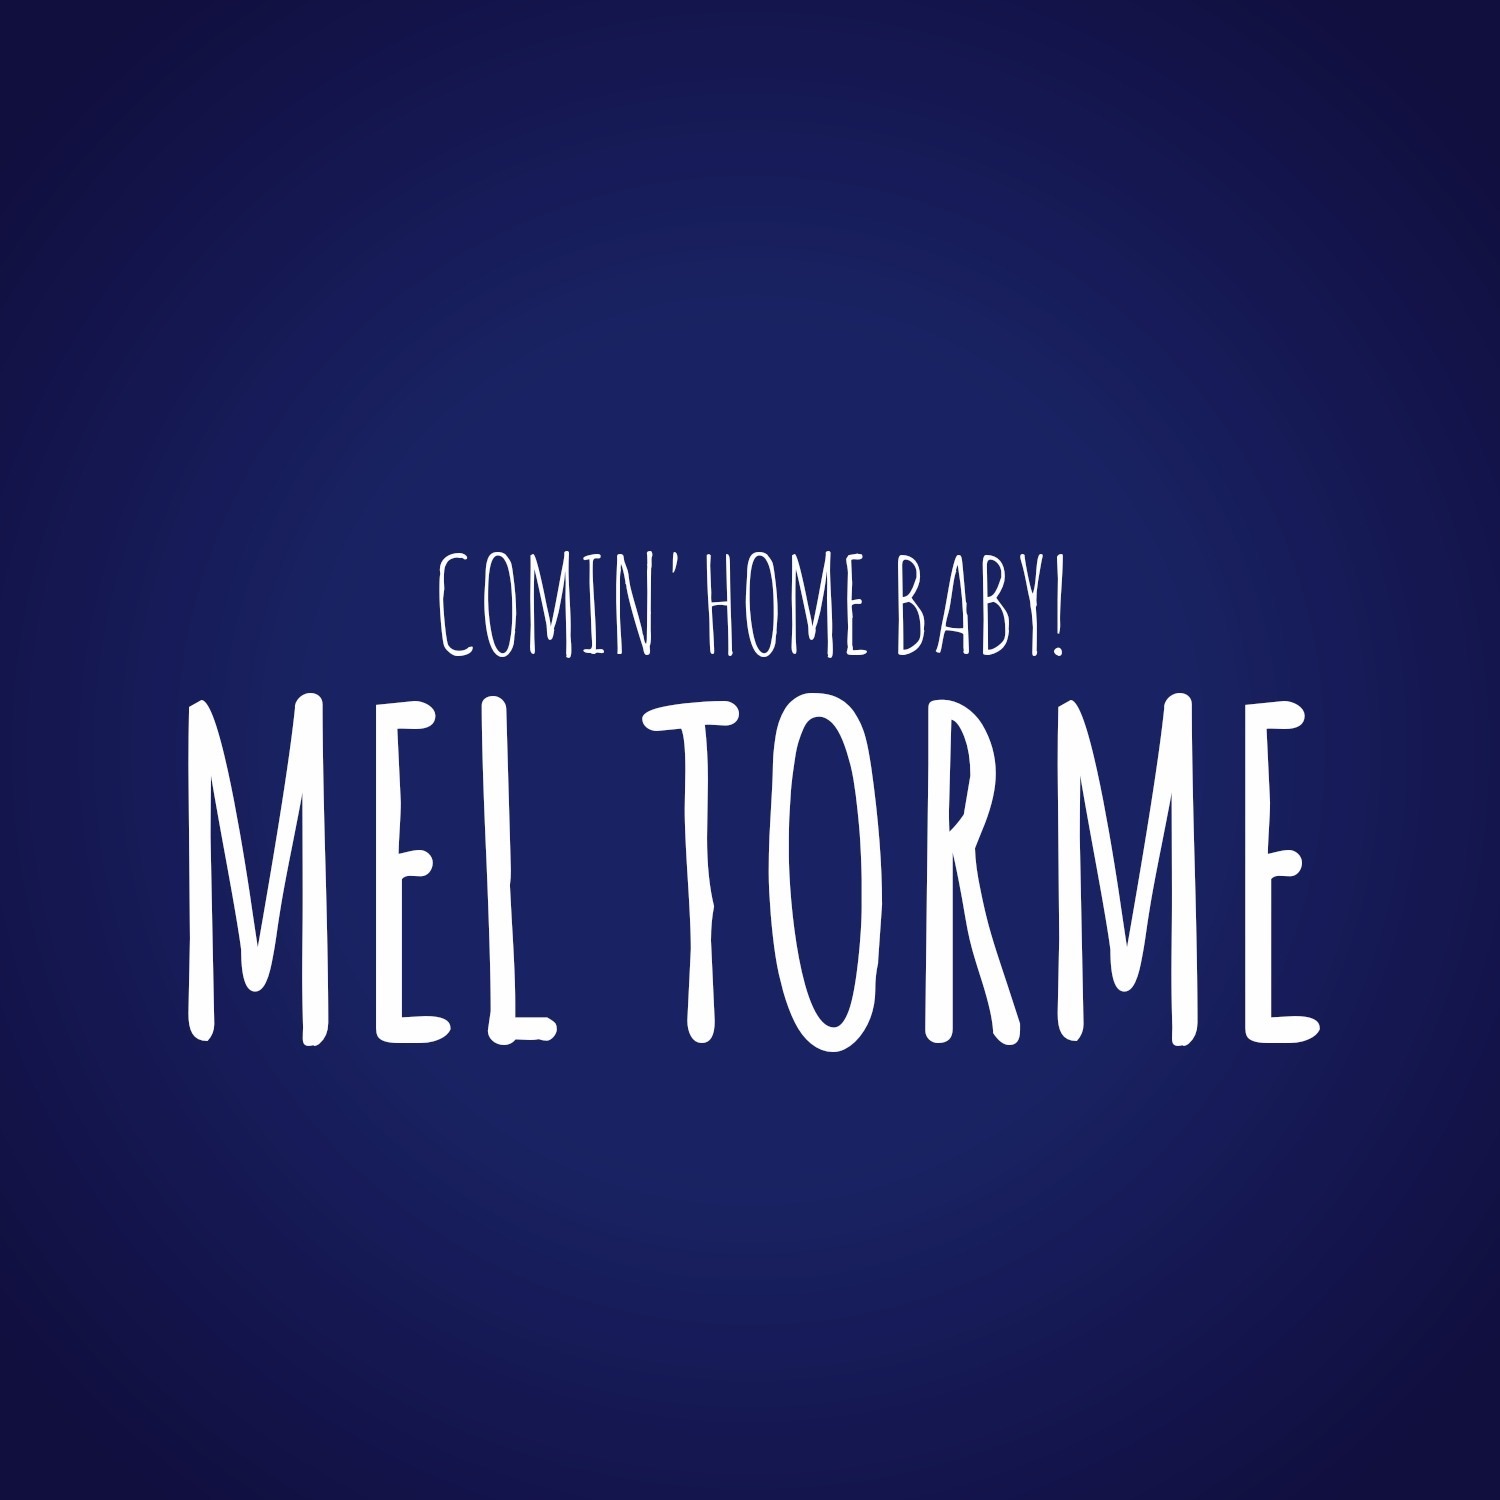 We coming home now. Mel Torme - Comin Home Baby. Coming Home Baby. Hachijuu – Comin’ Home. Prism - Comin' Home.